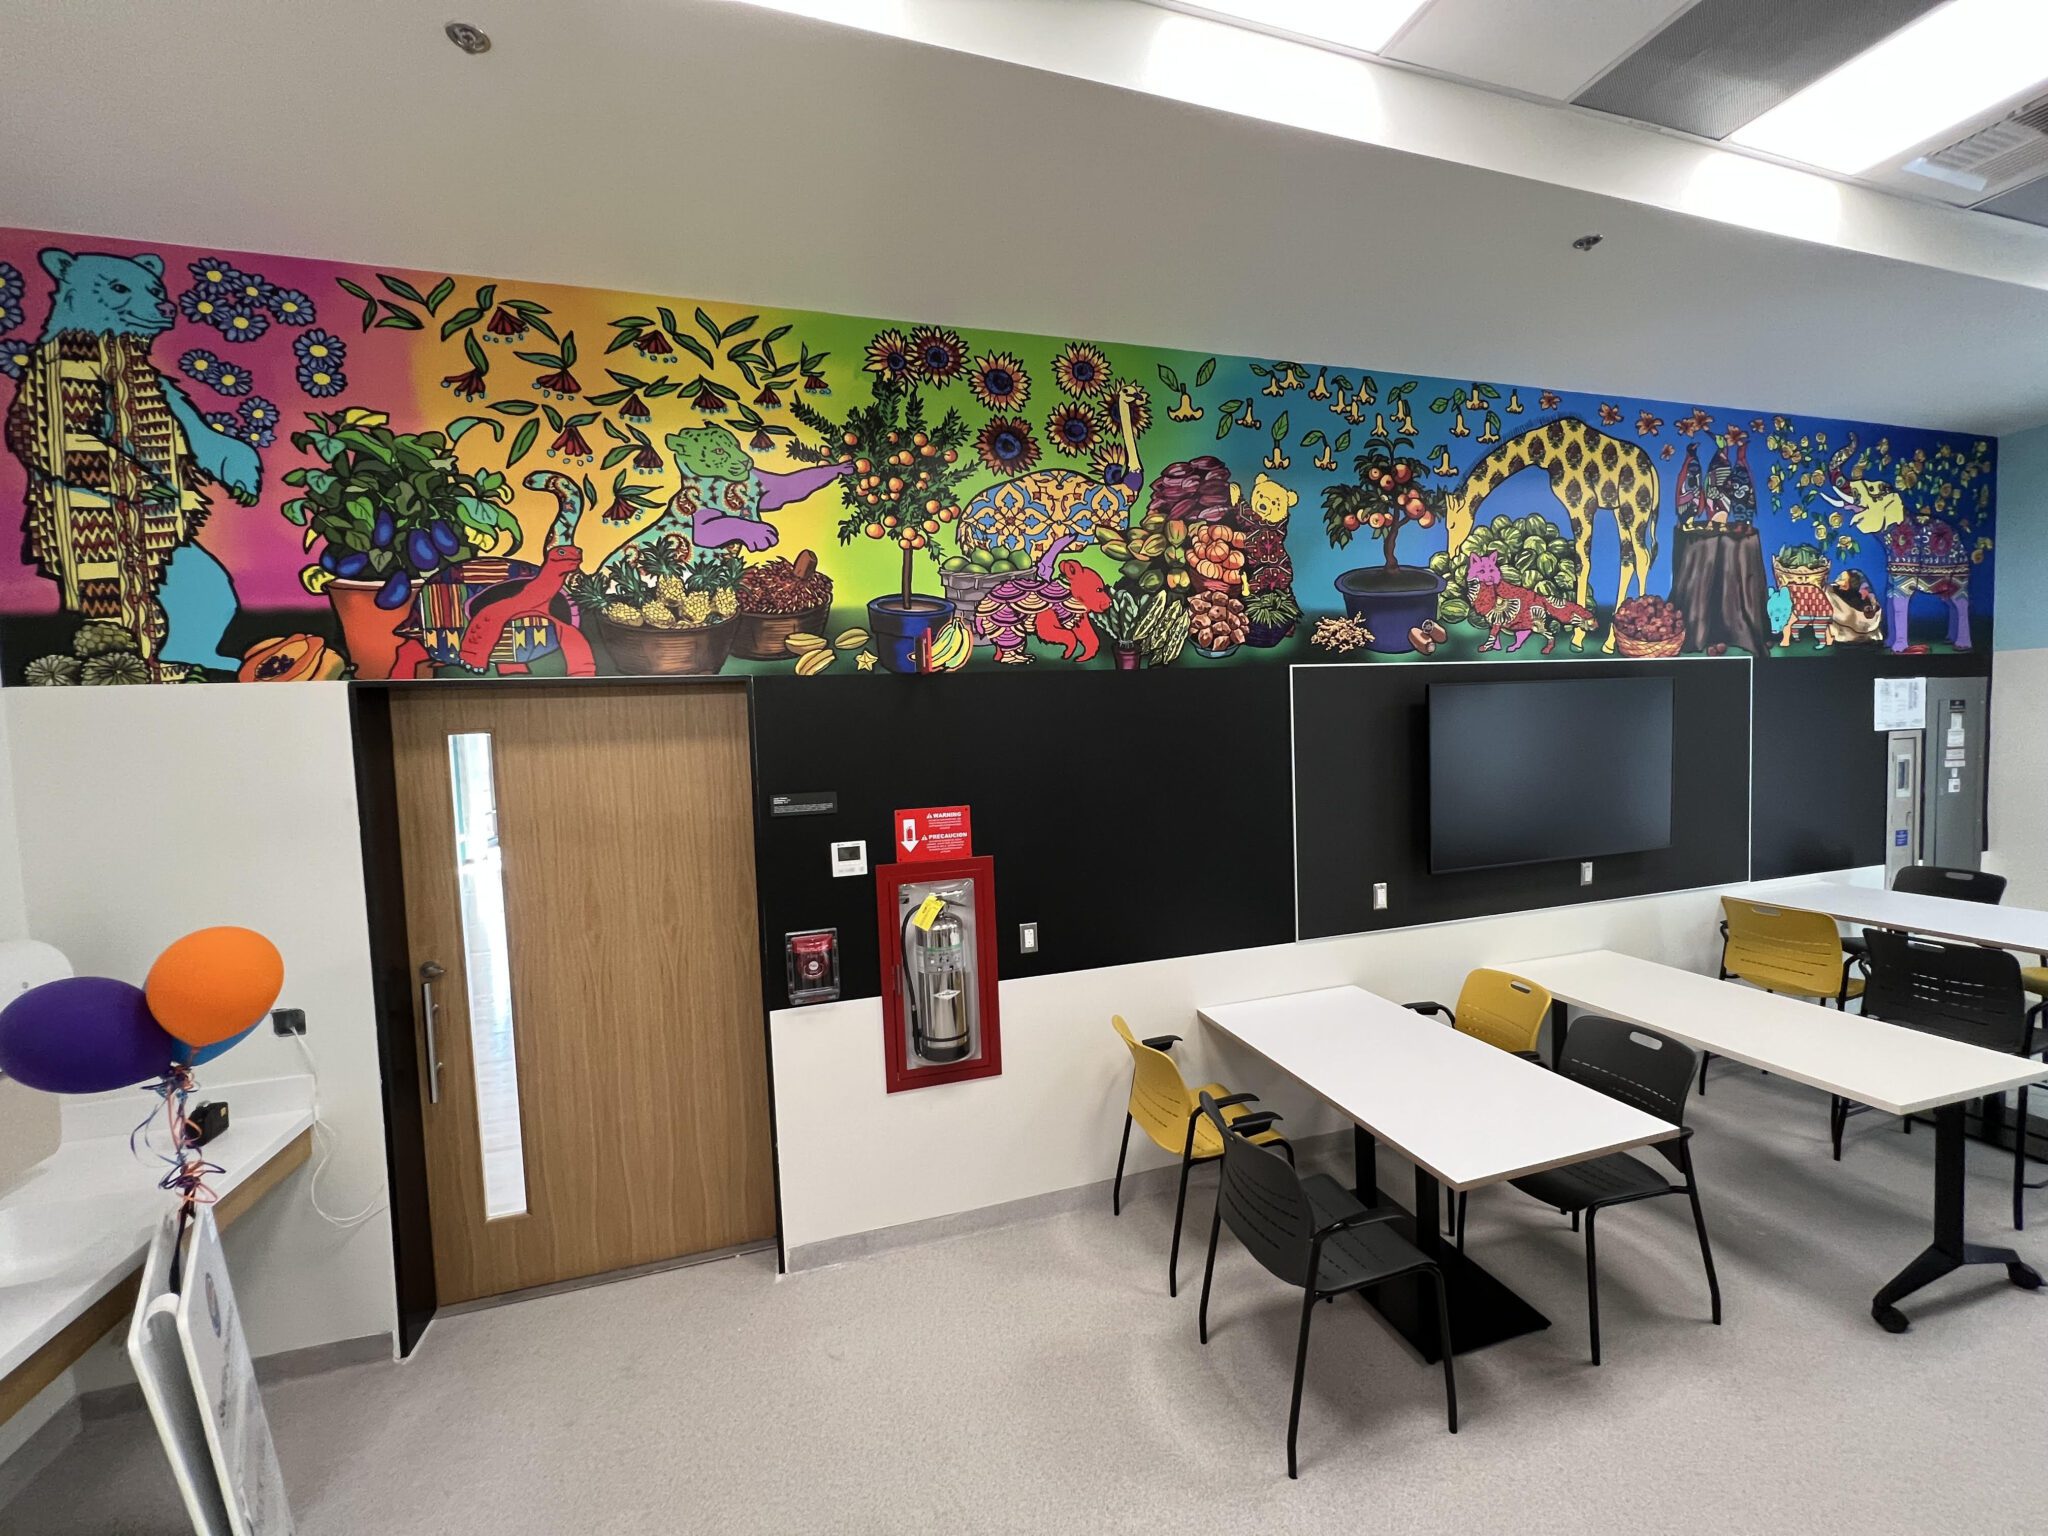 colorful painted mural along top of wall in a classroom setting